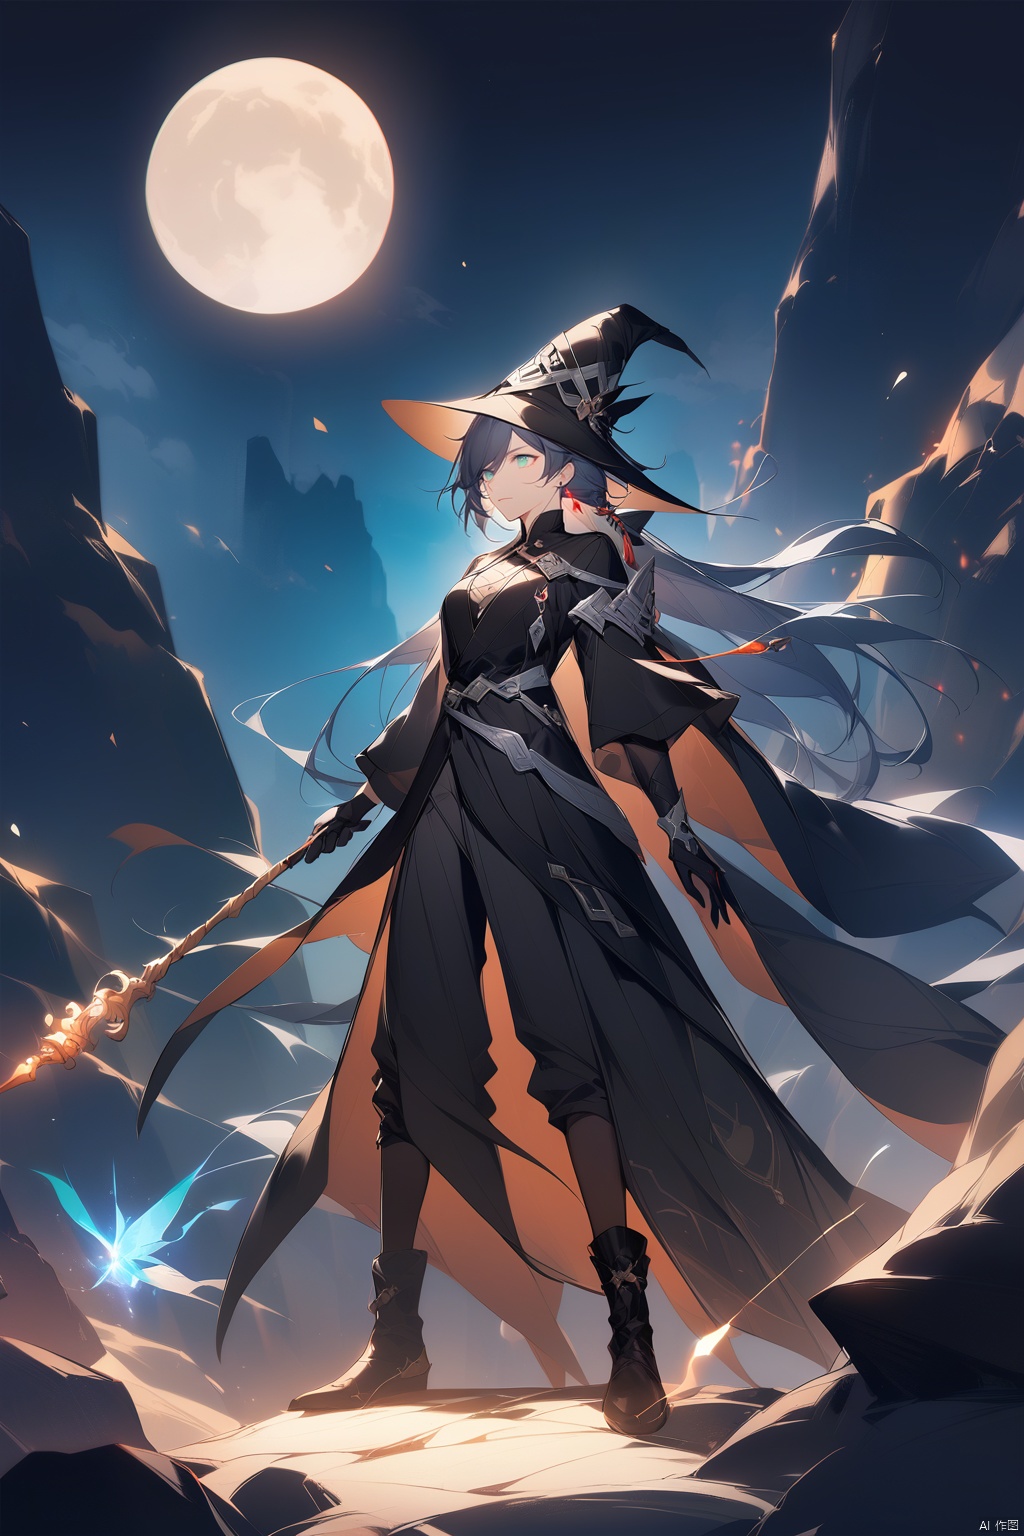  [[fu hua (phoenix)(honkai impact 3rd)]],nai3,1girl,solo,blue eyes
{artist:ask(askzy)}, 
1boy, wizard outfit, holding wand, intense gaze, green eyes, black robe with silver trim, pointed hat, standing on rocky outcropping, dramatic lighting, full moon backdrop, glowing magic effects, detailed gloves, leather boots, aged parchment scroll in the other hand, textured fabric, facial hair, staff with intricate carvings, fantasy setting